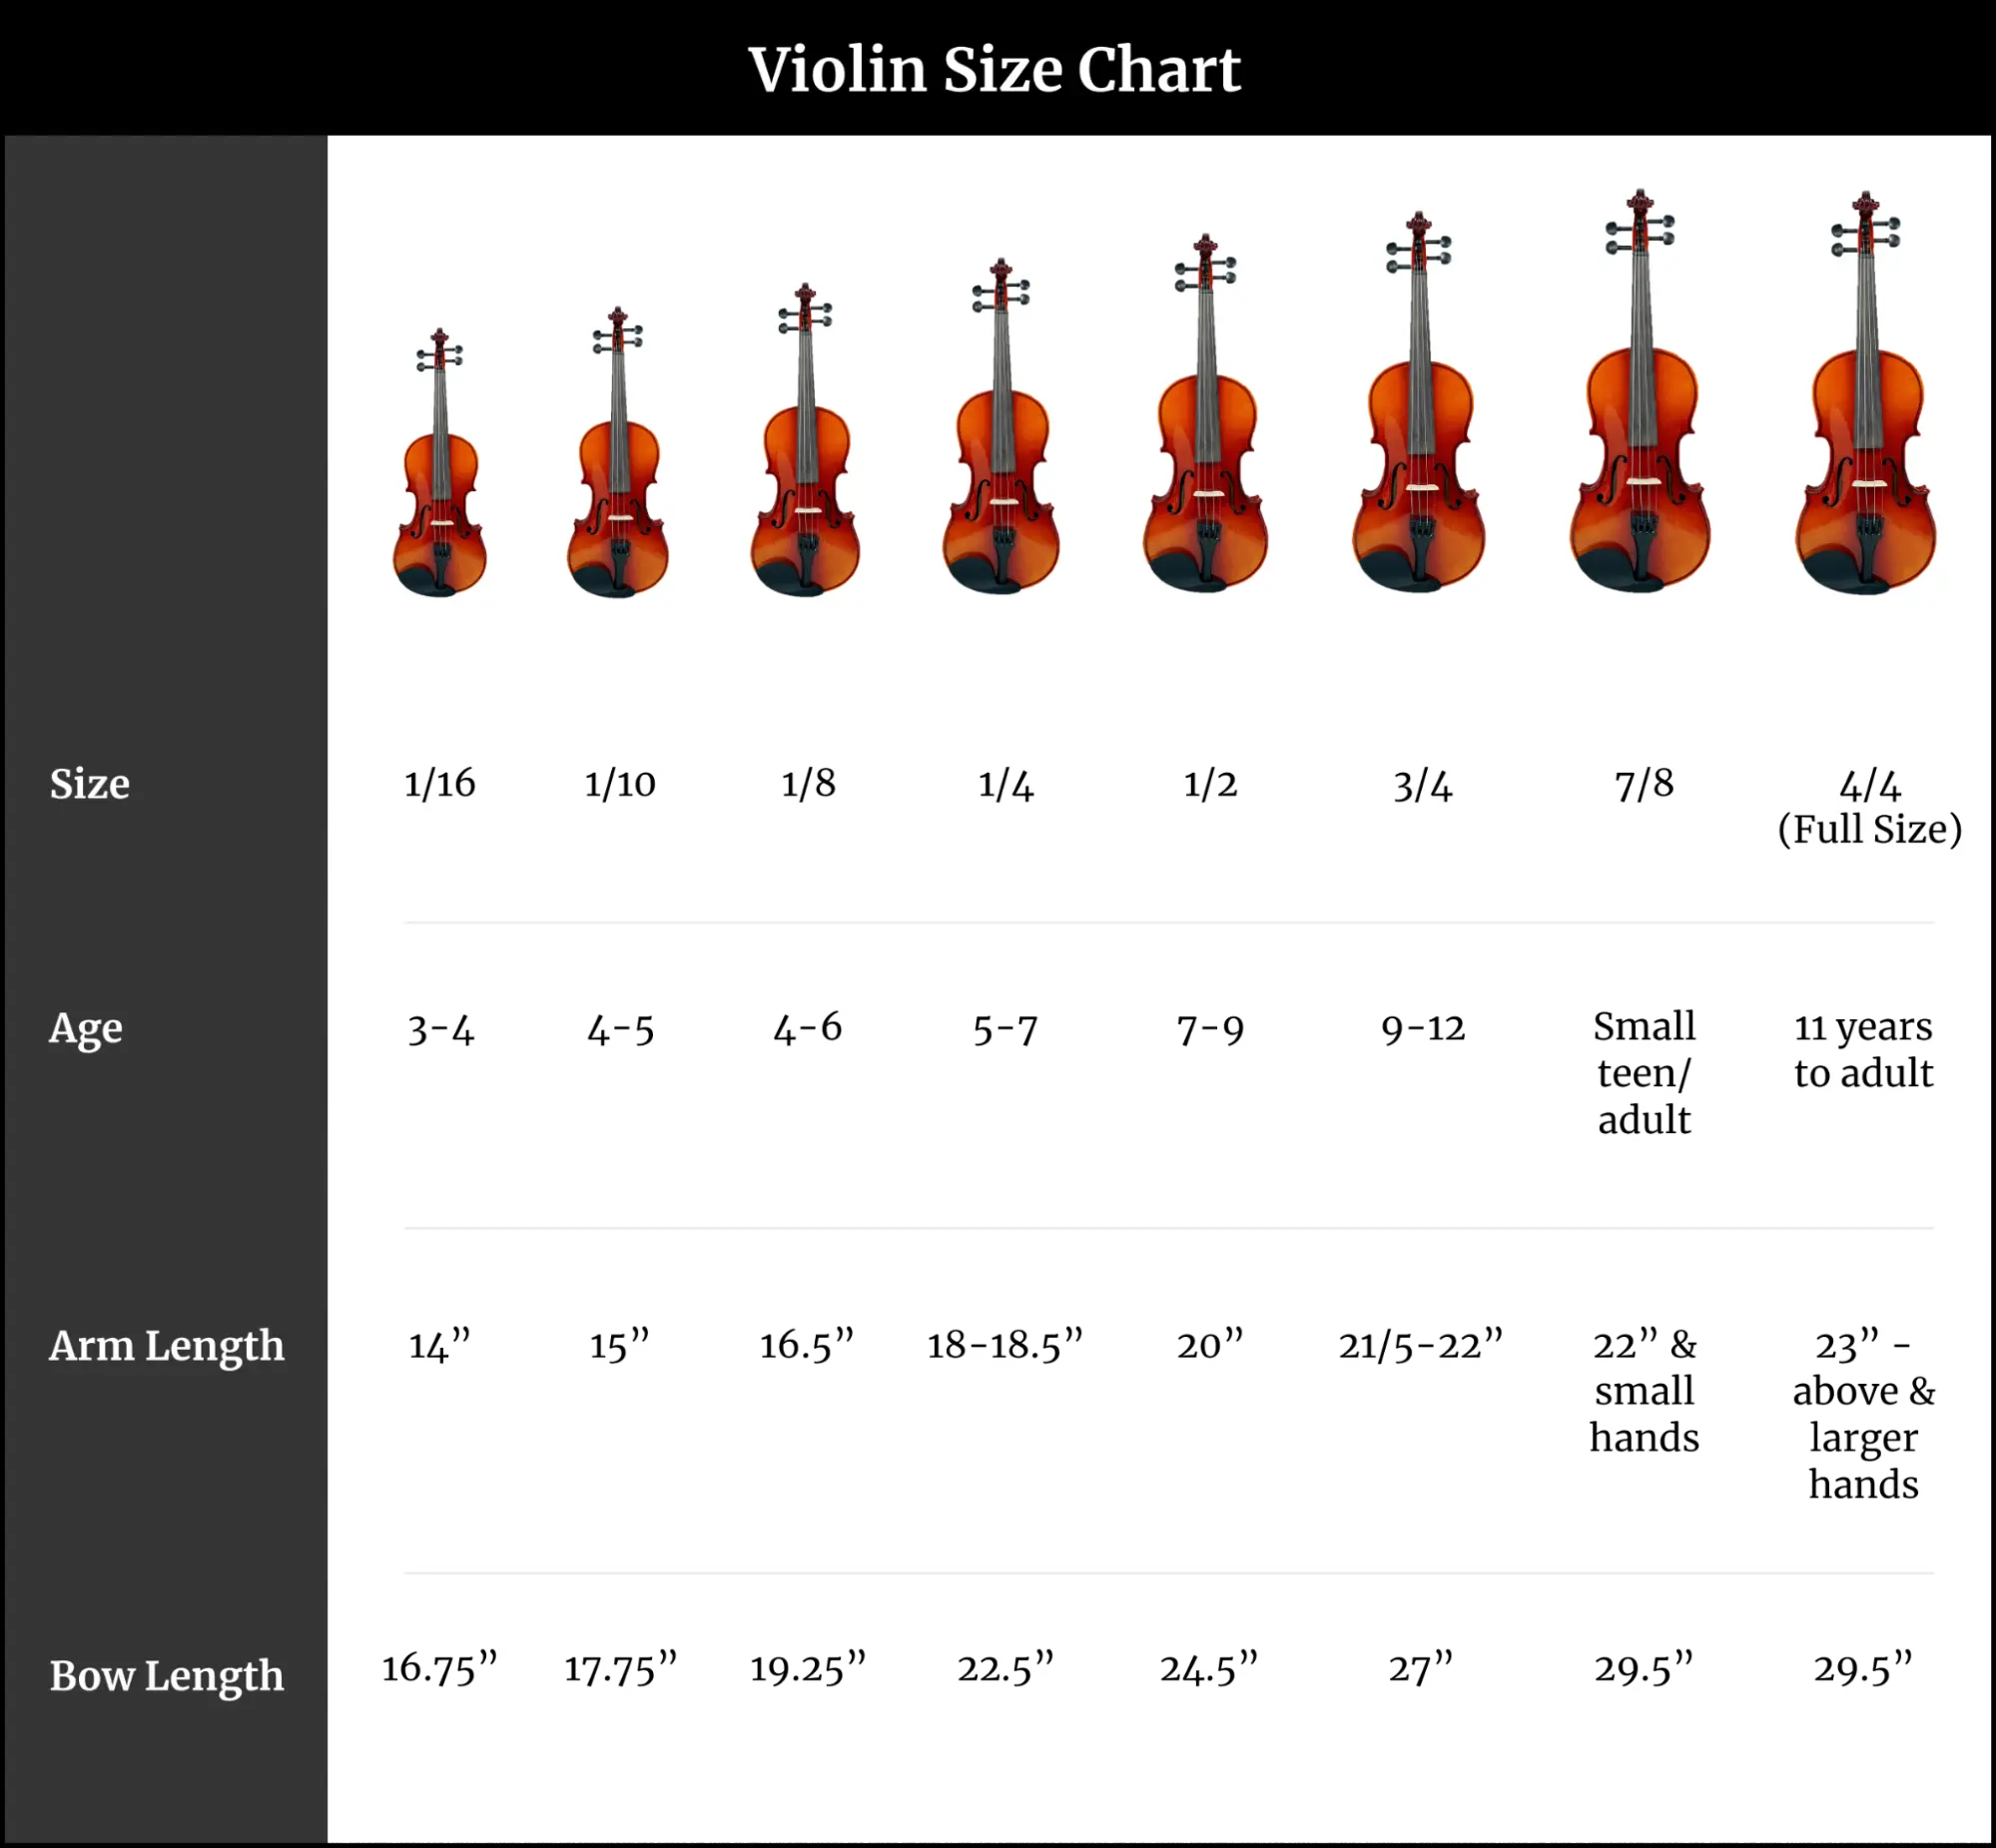 The Art of Violin sizing: What size violin does your child need